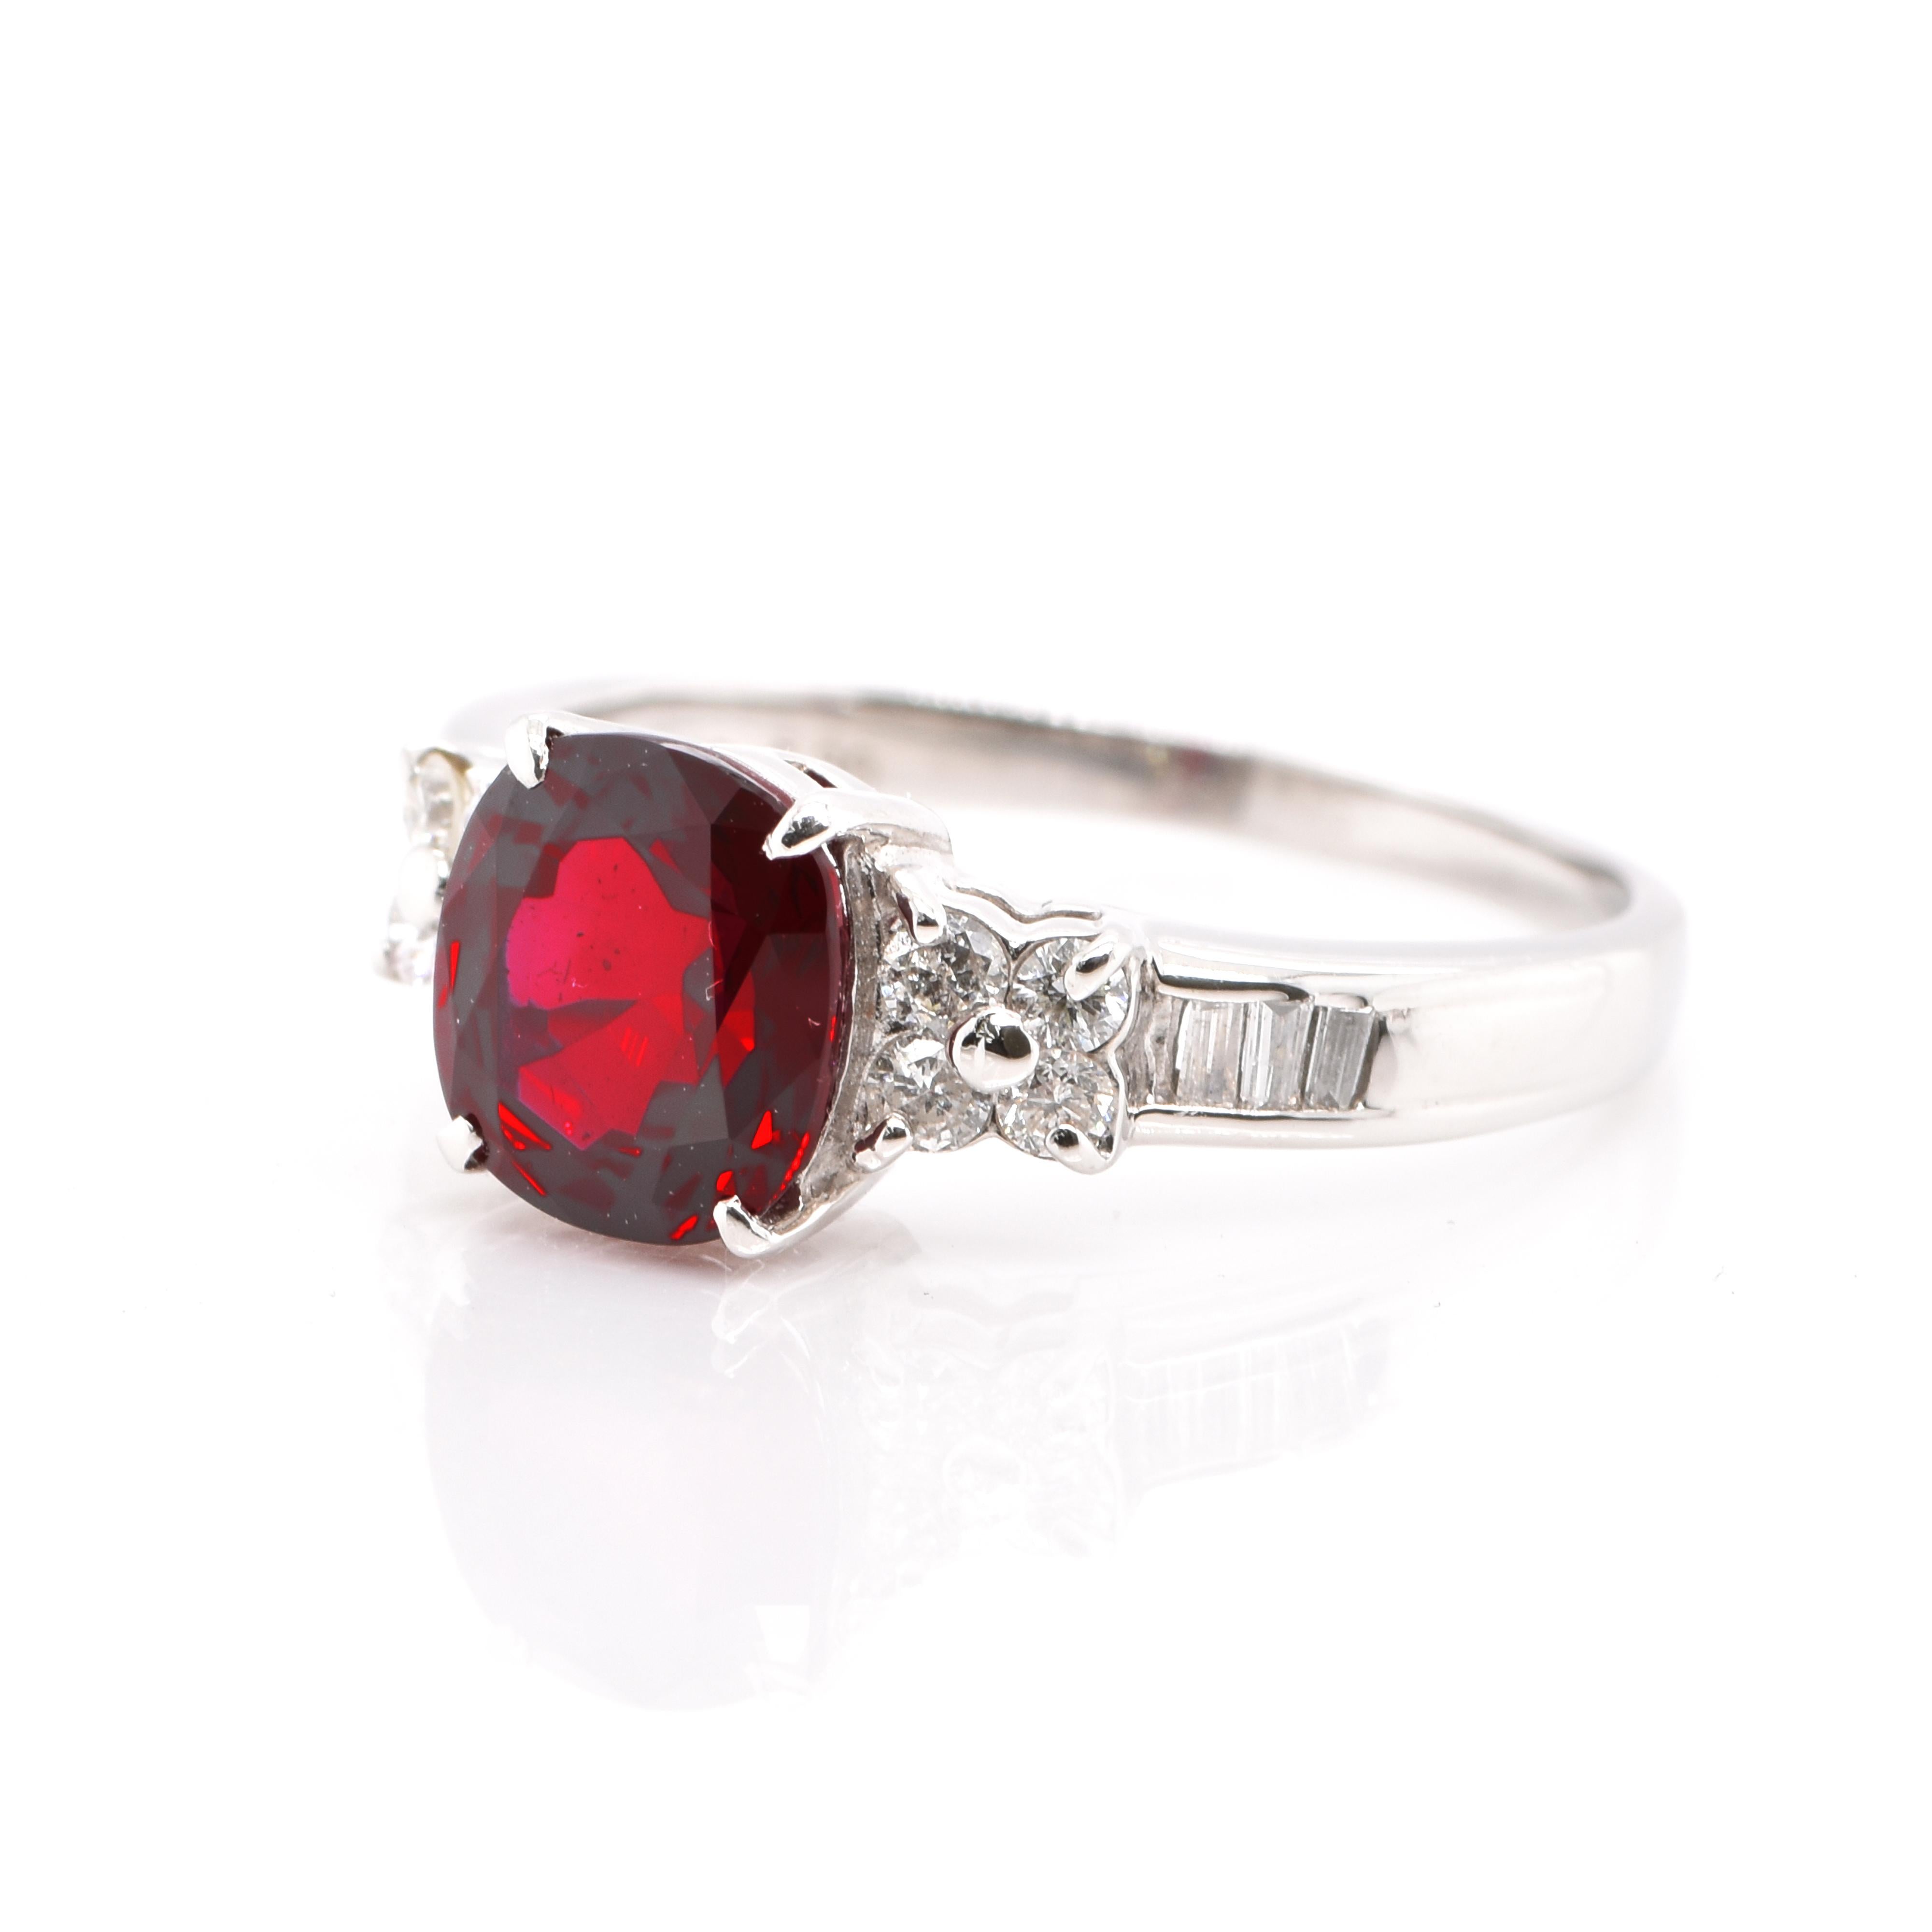 A stunning Ring featuring a GRS Lab Certified, 2.30 Carat, Natural, Vivid-Red Ruby and 0.31 Carats of Diamonds set in Platinum. Rubies are referred to as 